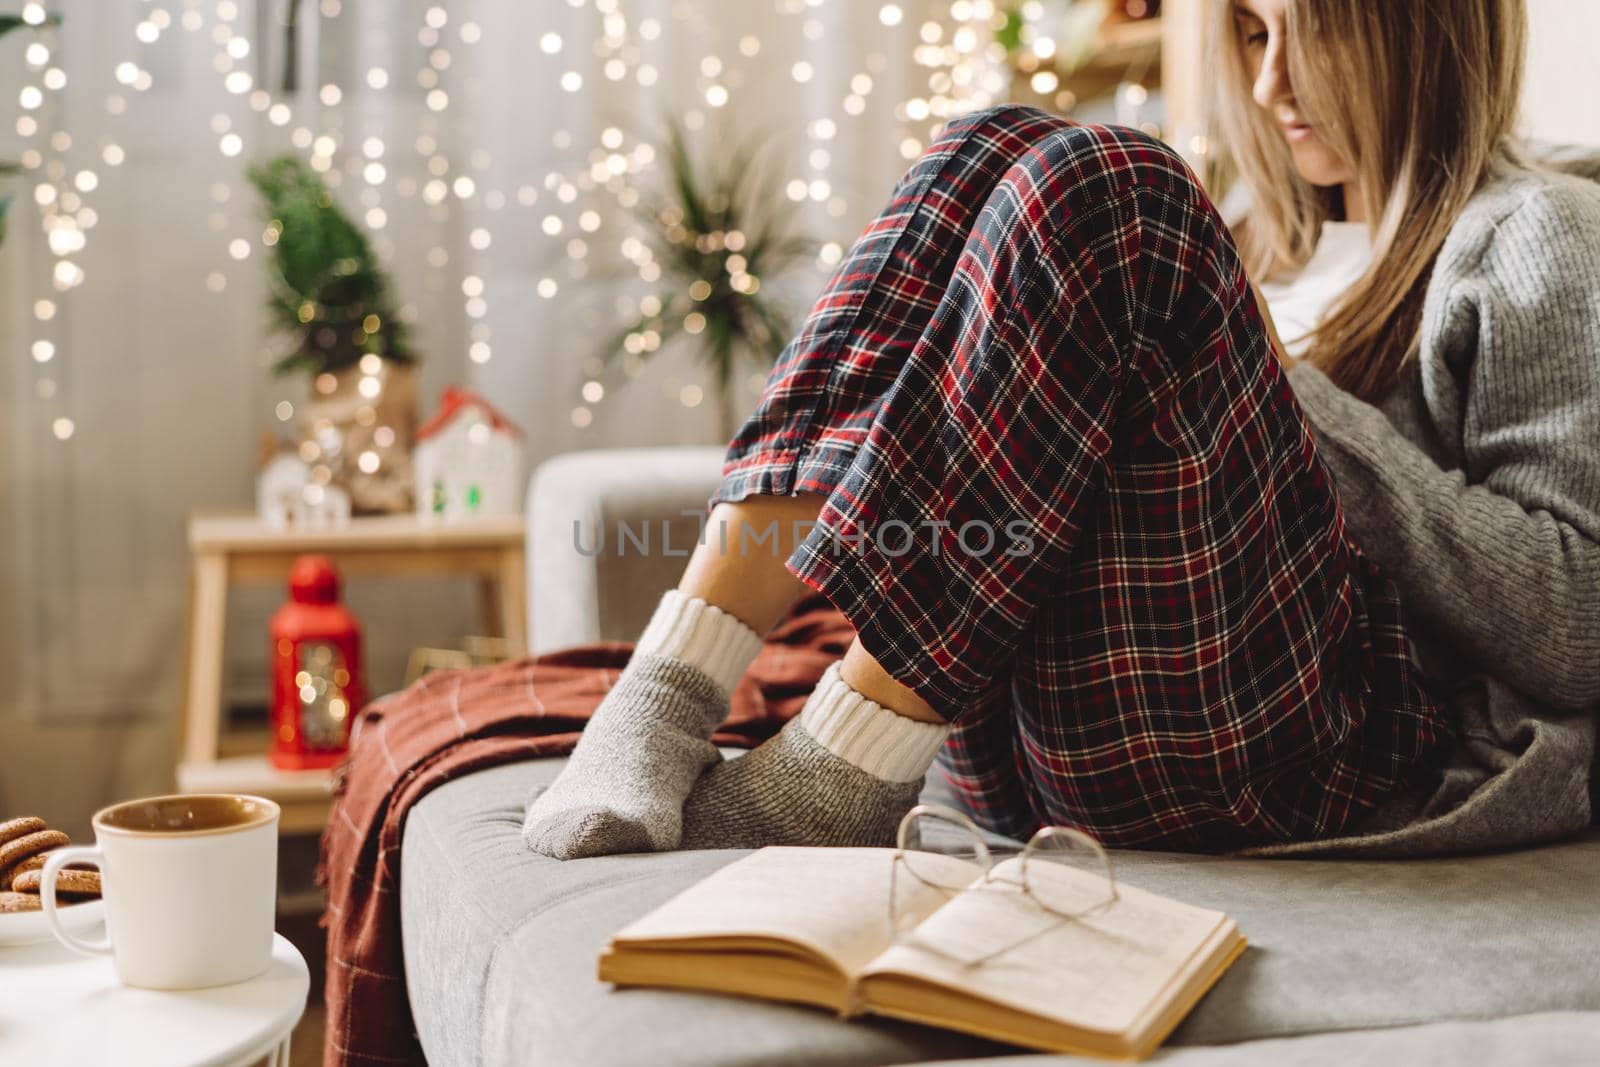 Cozy woman legs in knitted winter warm socks, sweater and checkered plaid drinking hot cocoa or coffee in mug, reading book, during resting on couch at home. Christmas holidays with decor and lights